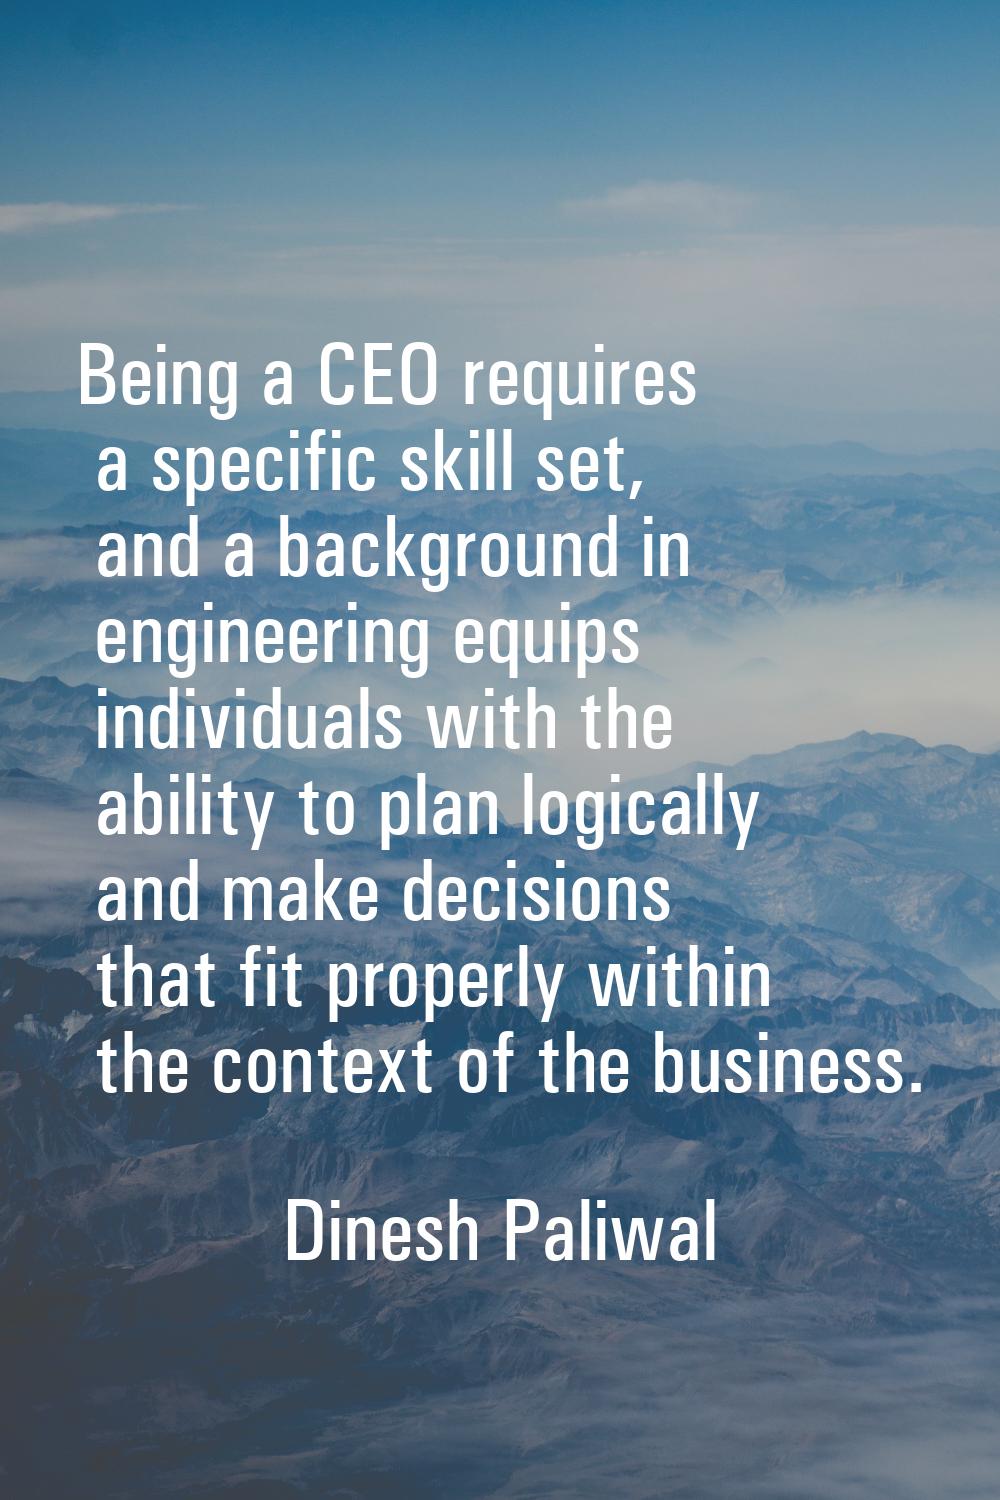 Being a CEO requires a specific skill set, and a background in engineering equips individuals with 